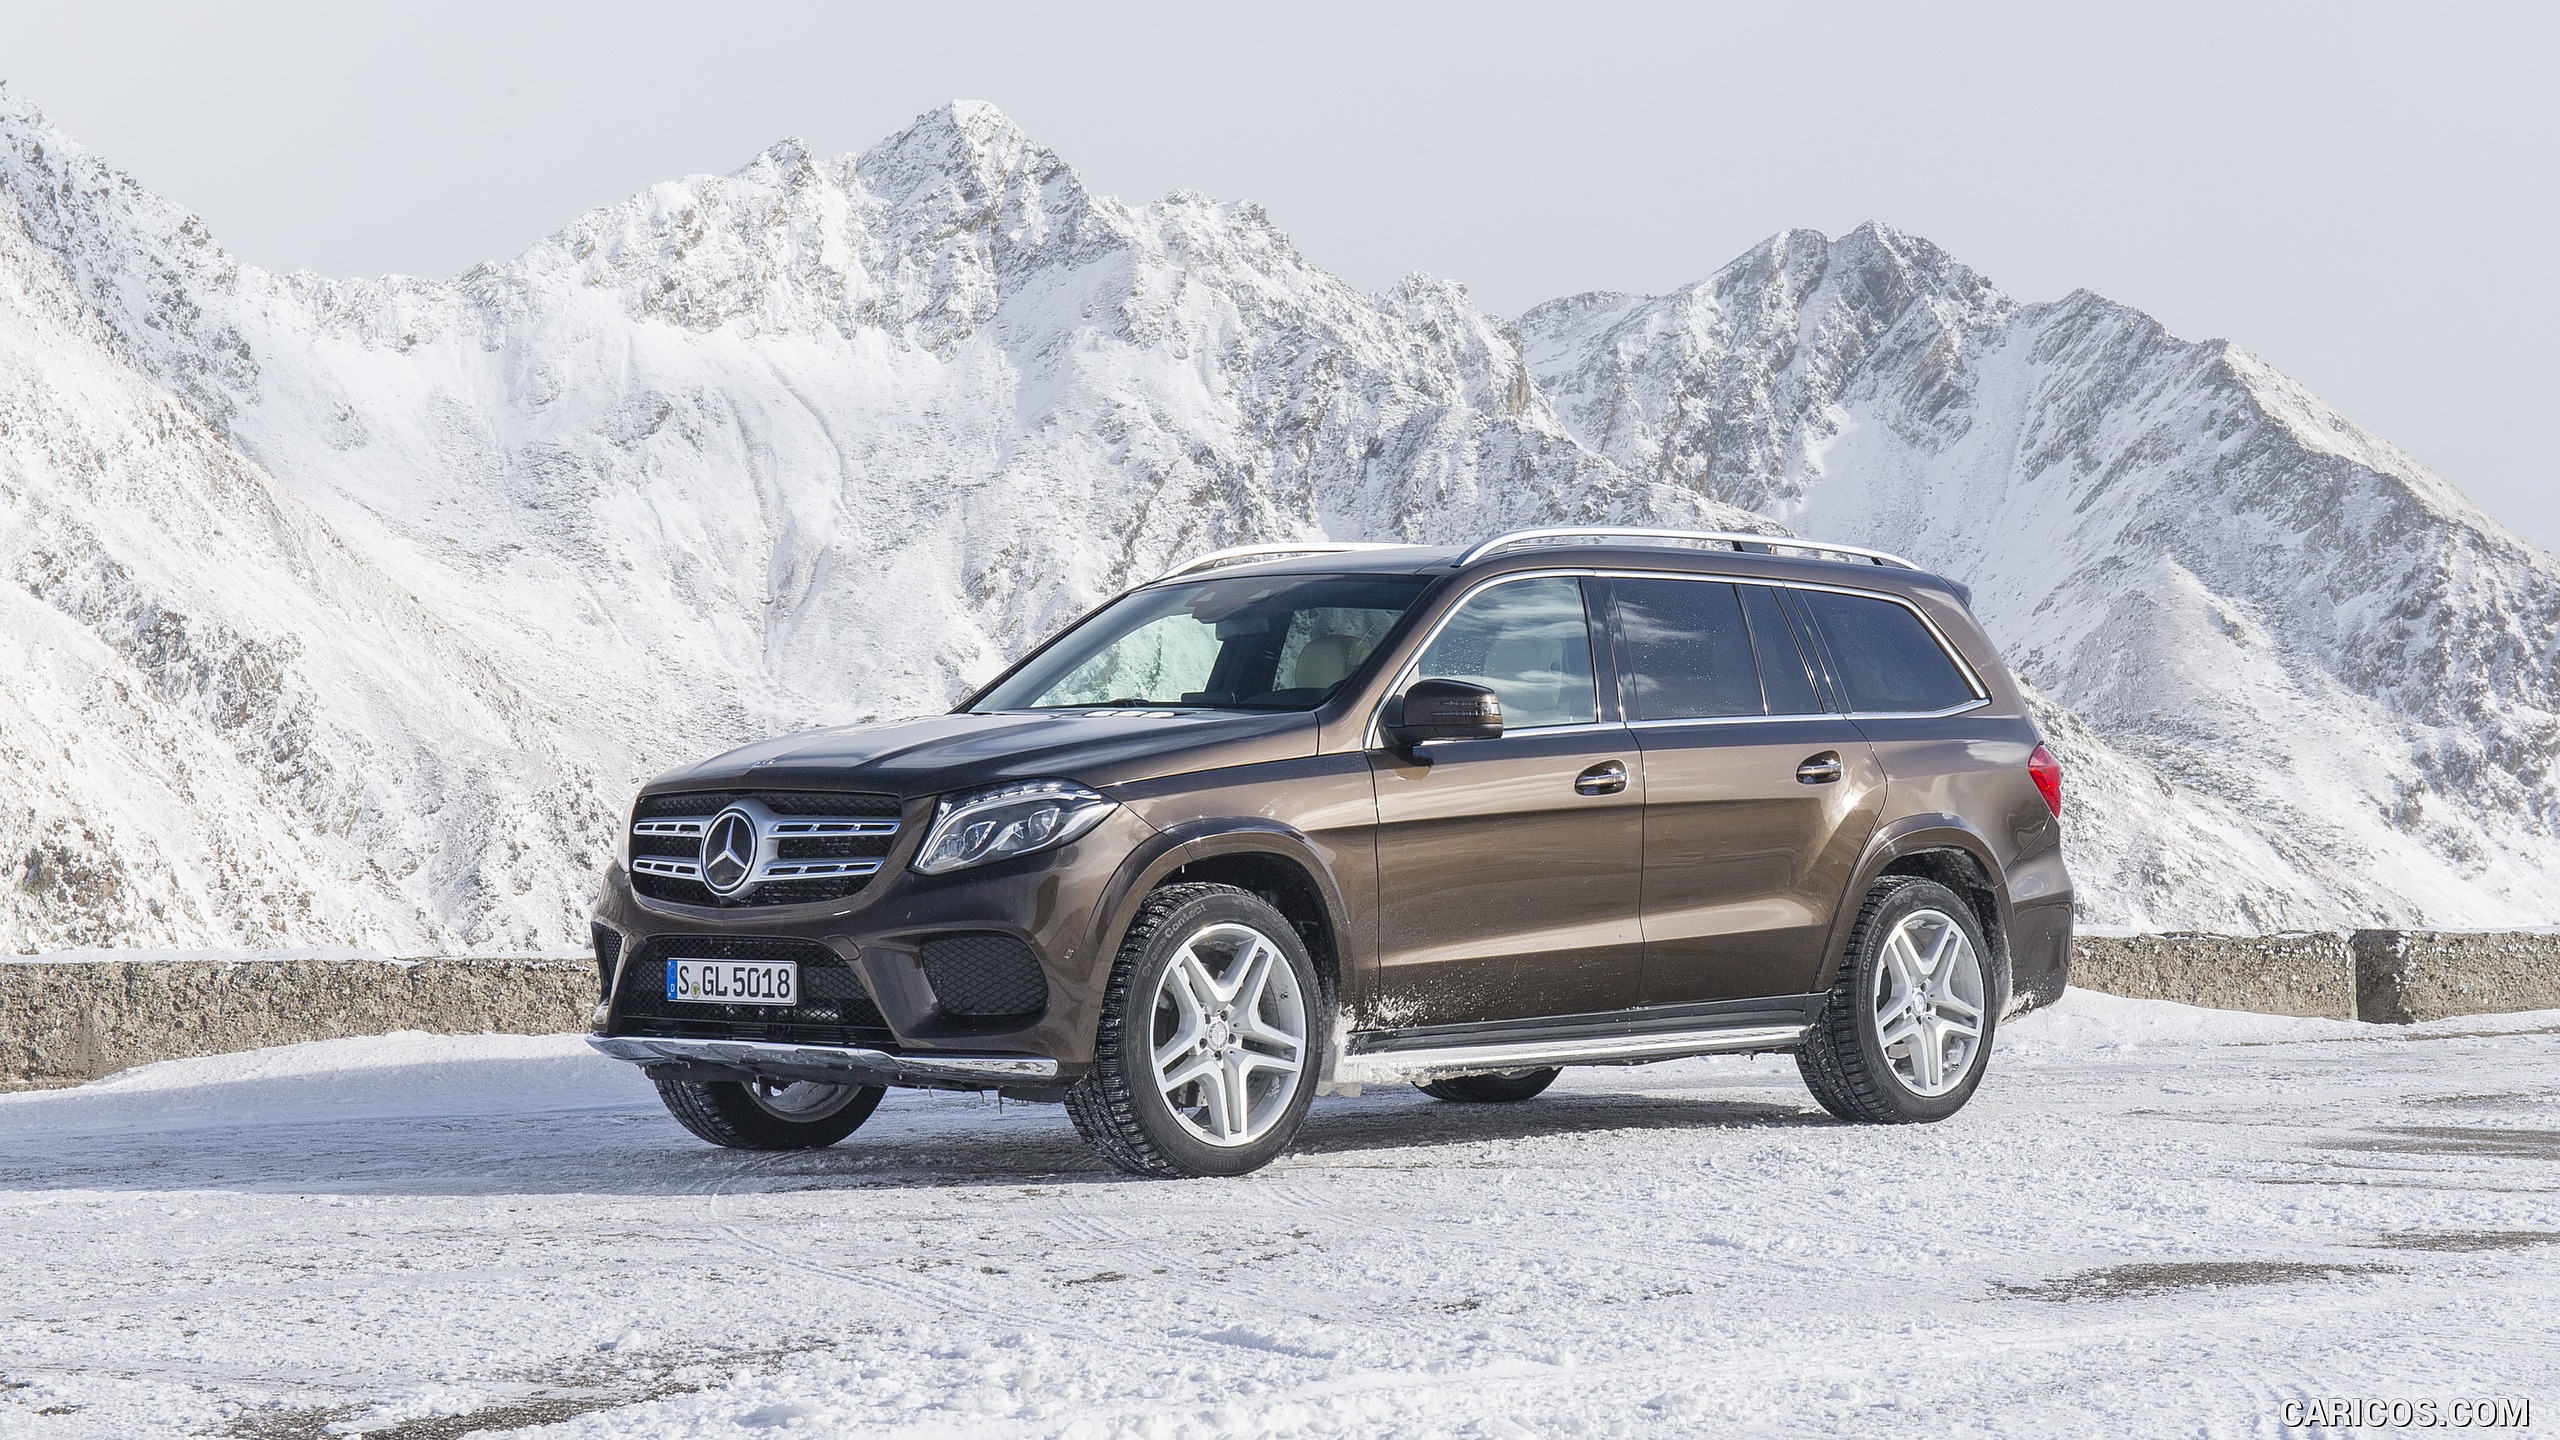 2017 Mercedes-Benz GLS 350d 4MATIC AMG Line in Snow - Front, #187 of 255